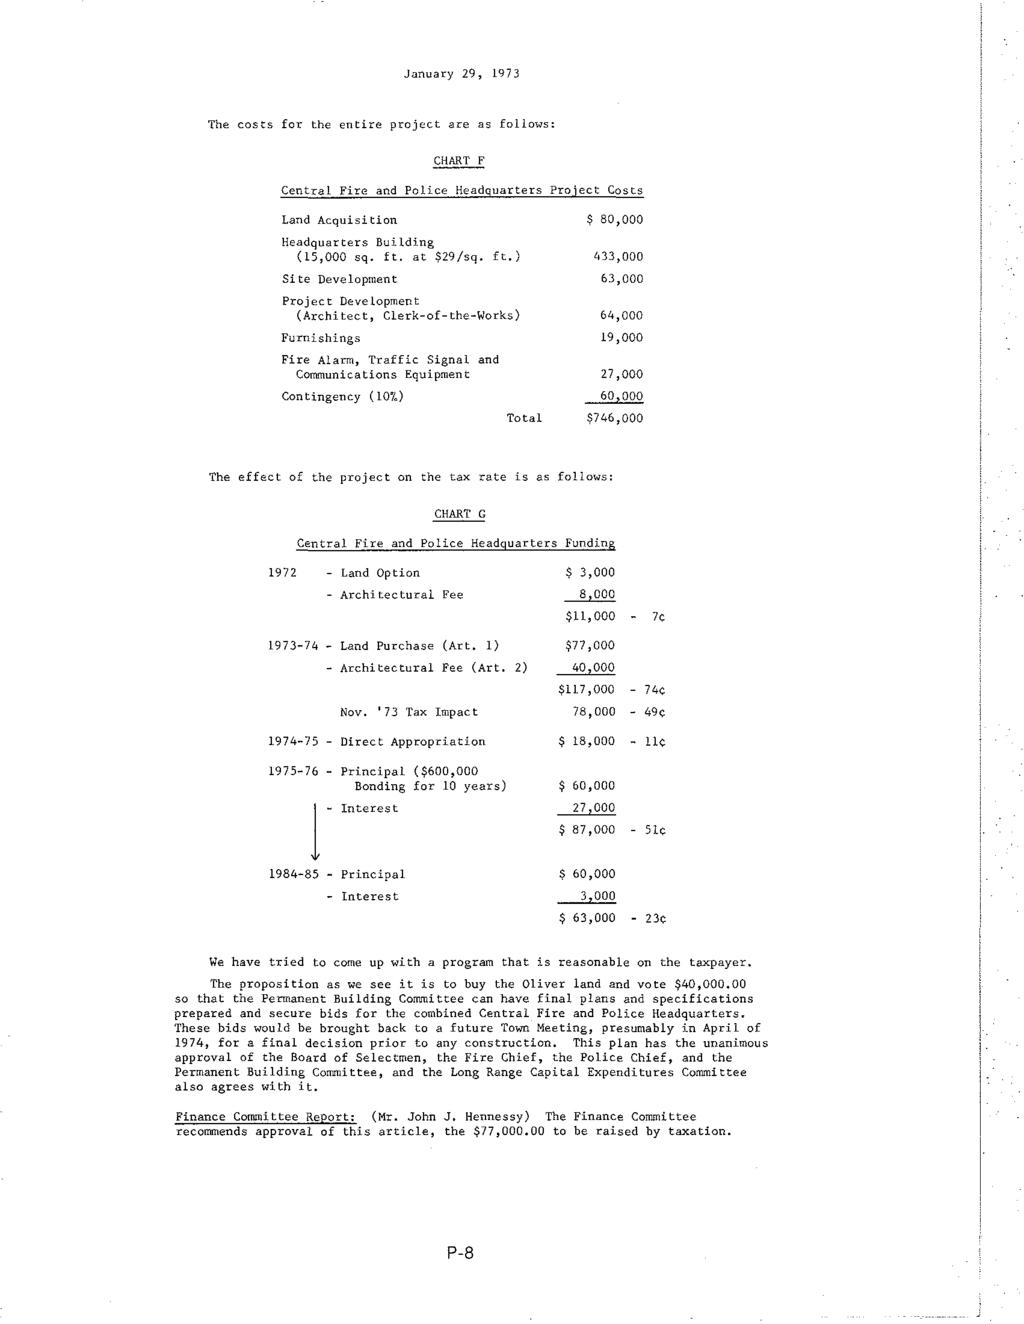 January 29, 1973 The costs for the entire project are as follows: Central Fire and Police Headquarters Project Costs Land Acquisition Headquarters Building (15,000 sq. ft.